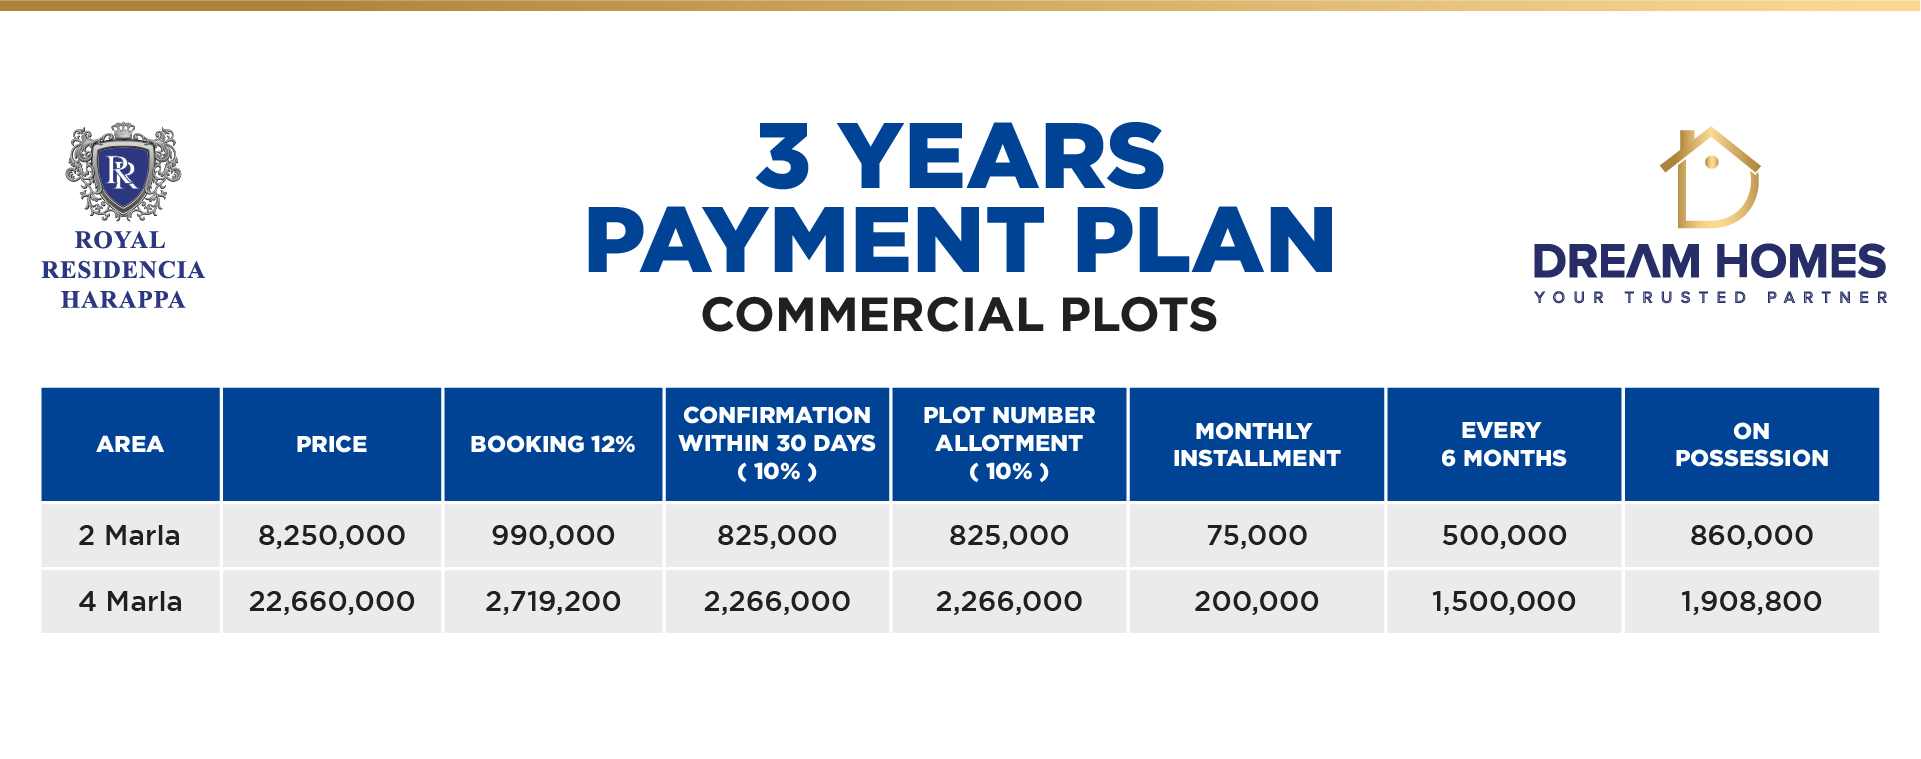 Royal Residencia Harappa Commercial Payment Plan